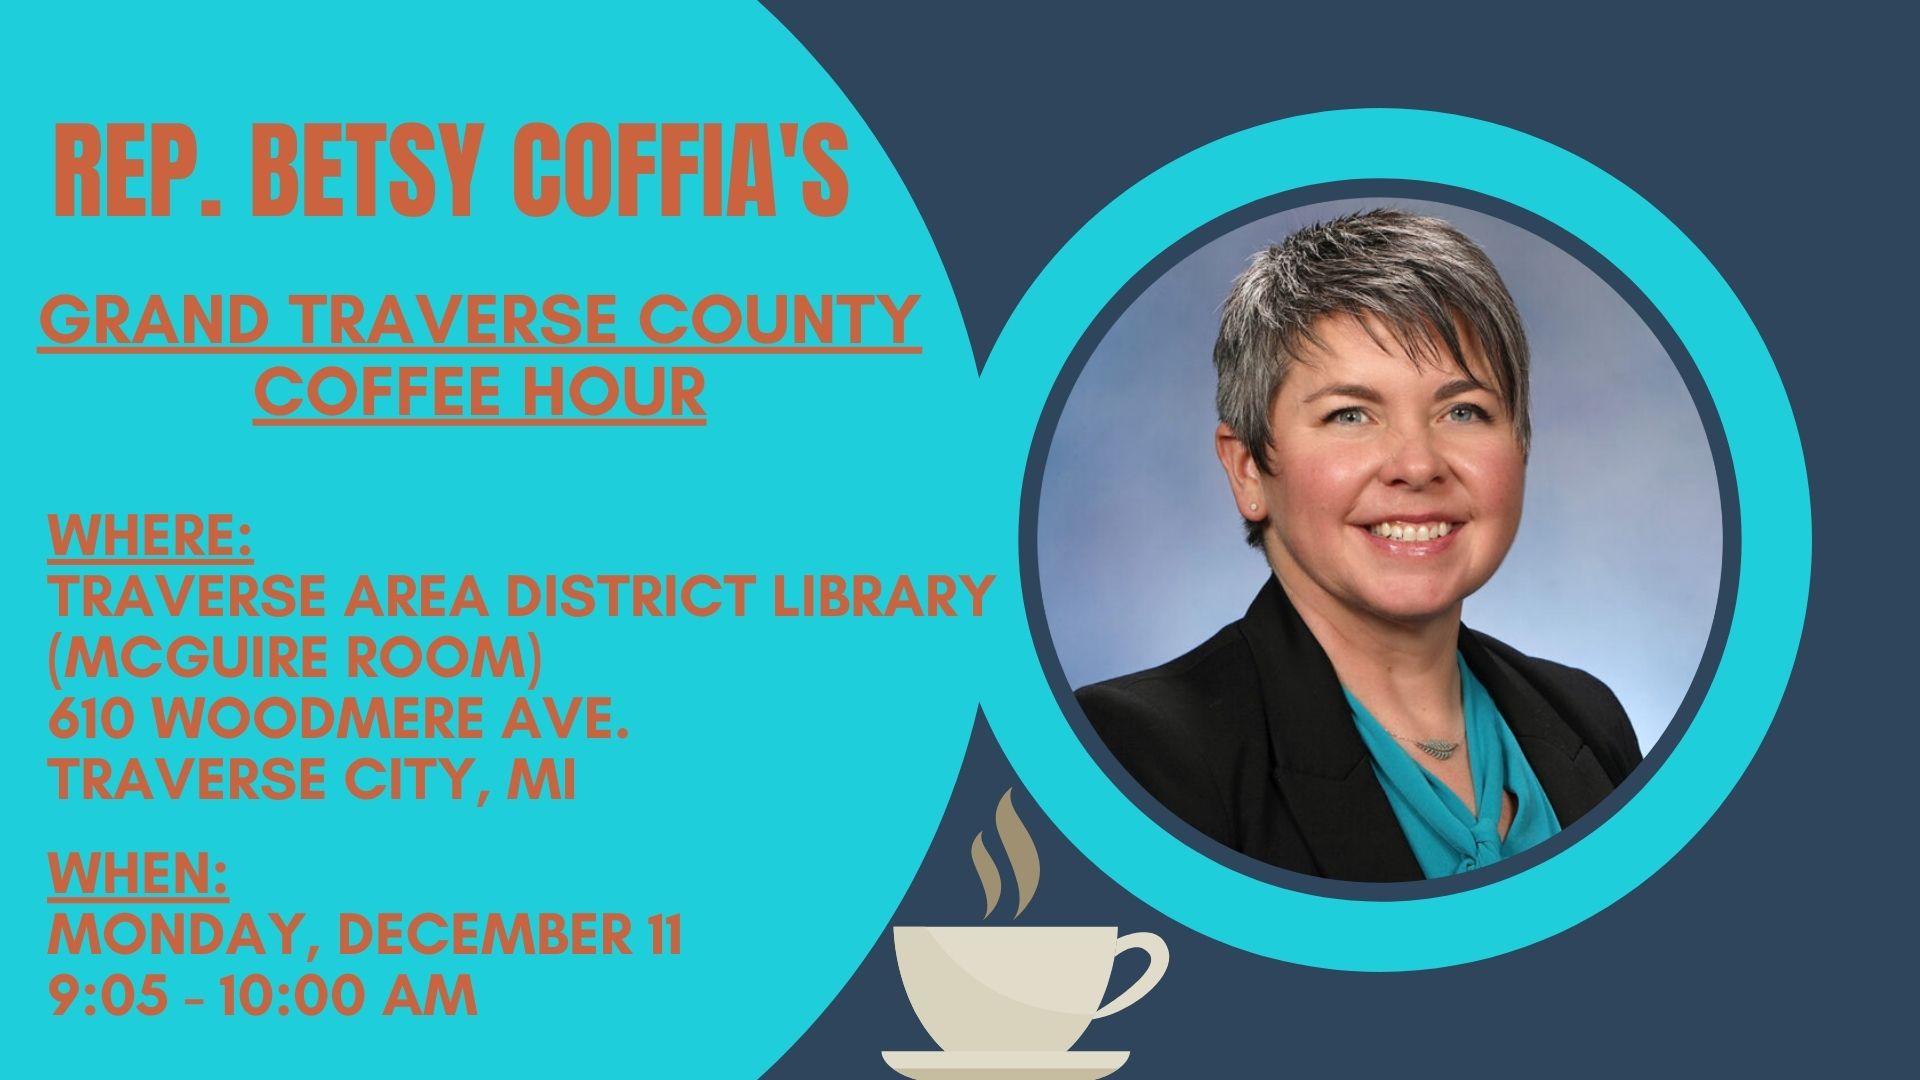 Rep. Coffia's Grand Traverse County Coffee Hour Graphic with the following information